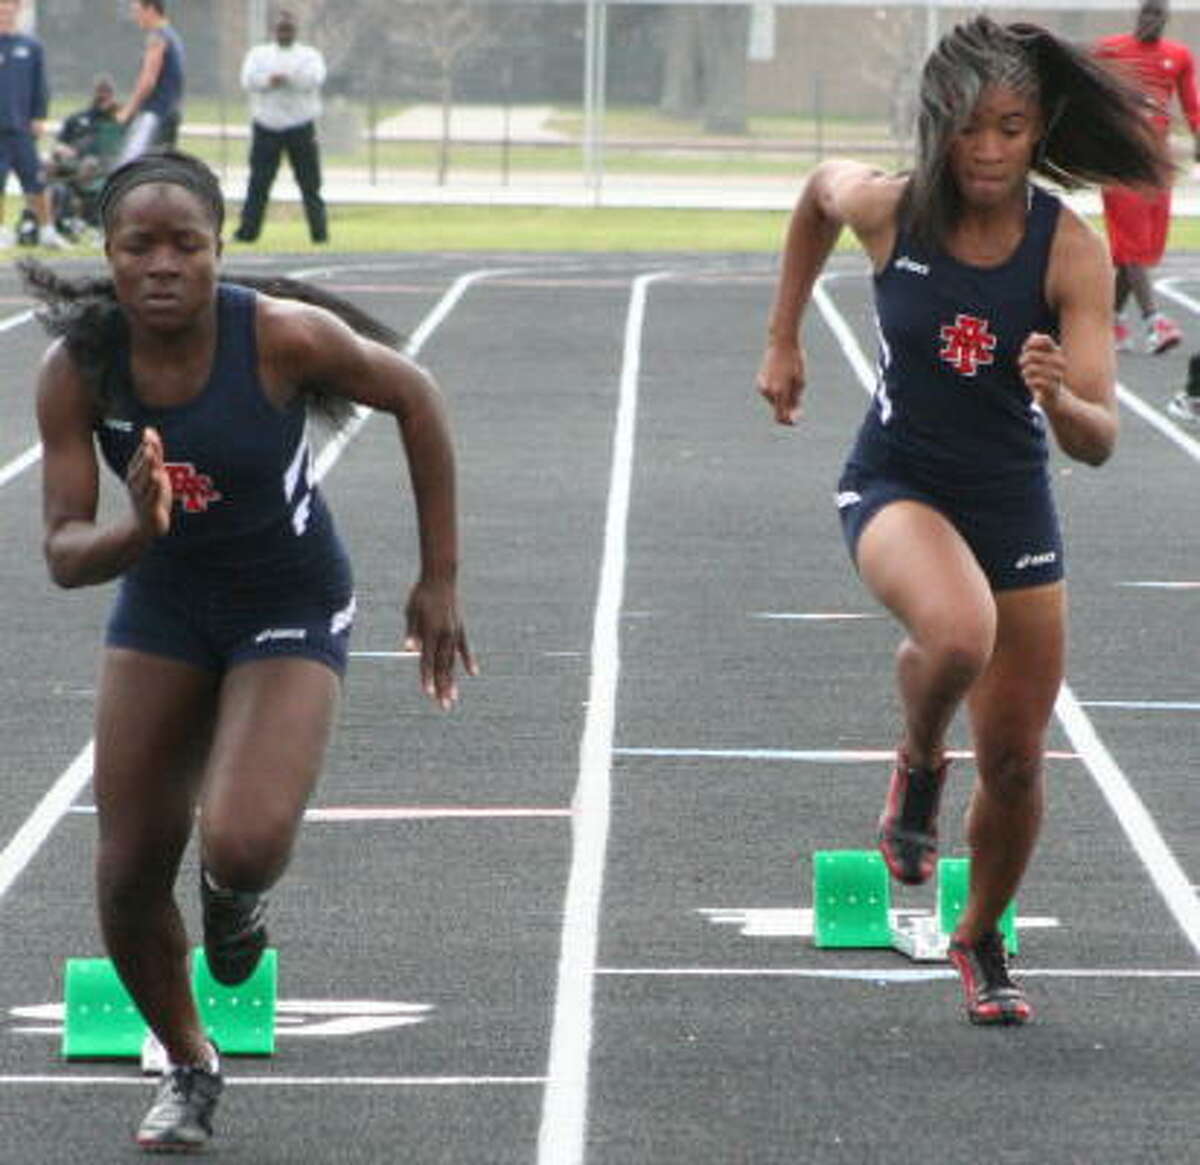 (From left) Alief Taylor's Morgan Pressley and Briana Jarrett take off in this race.